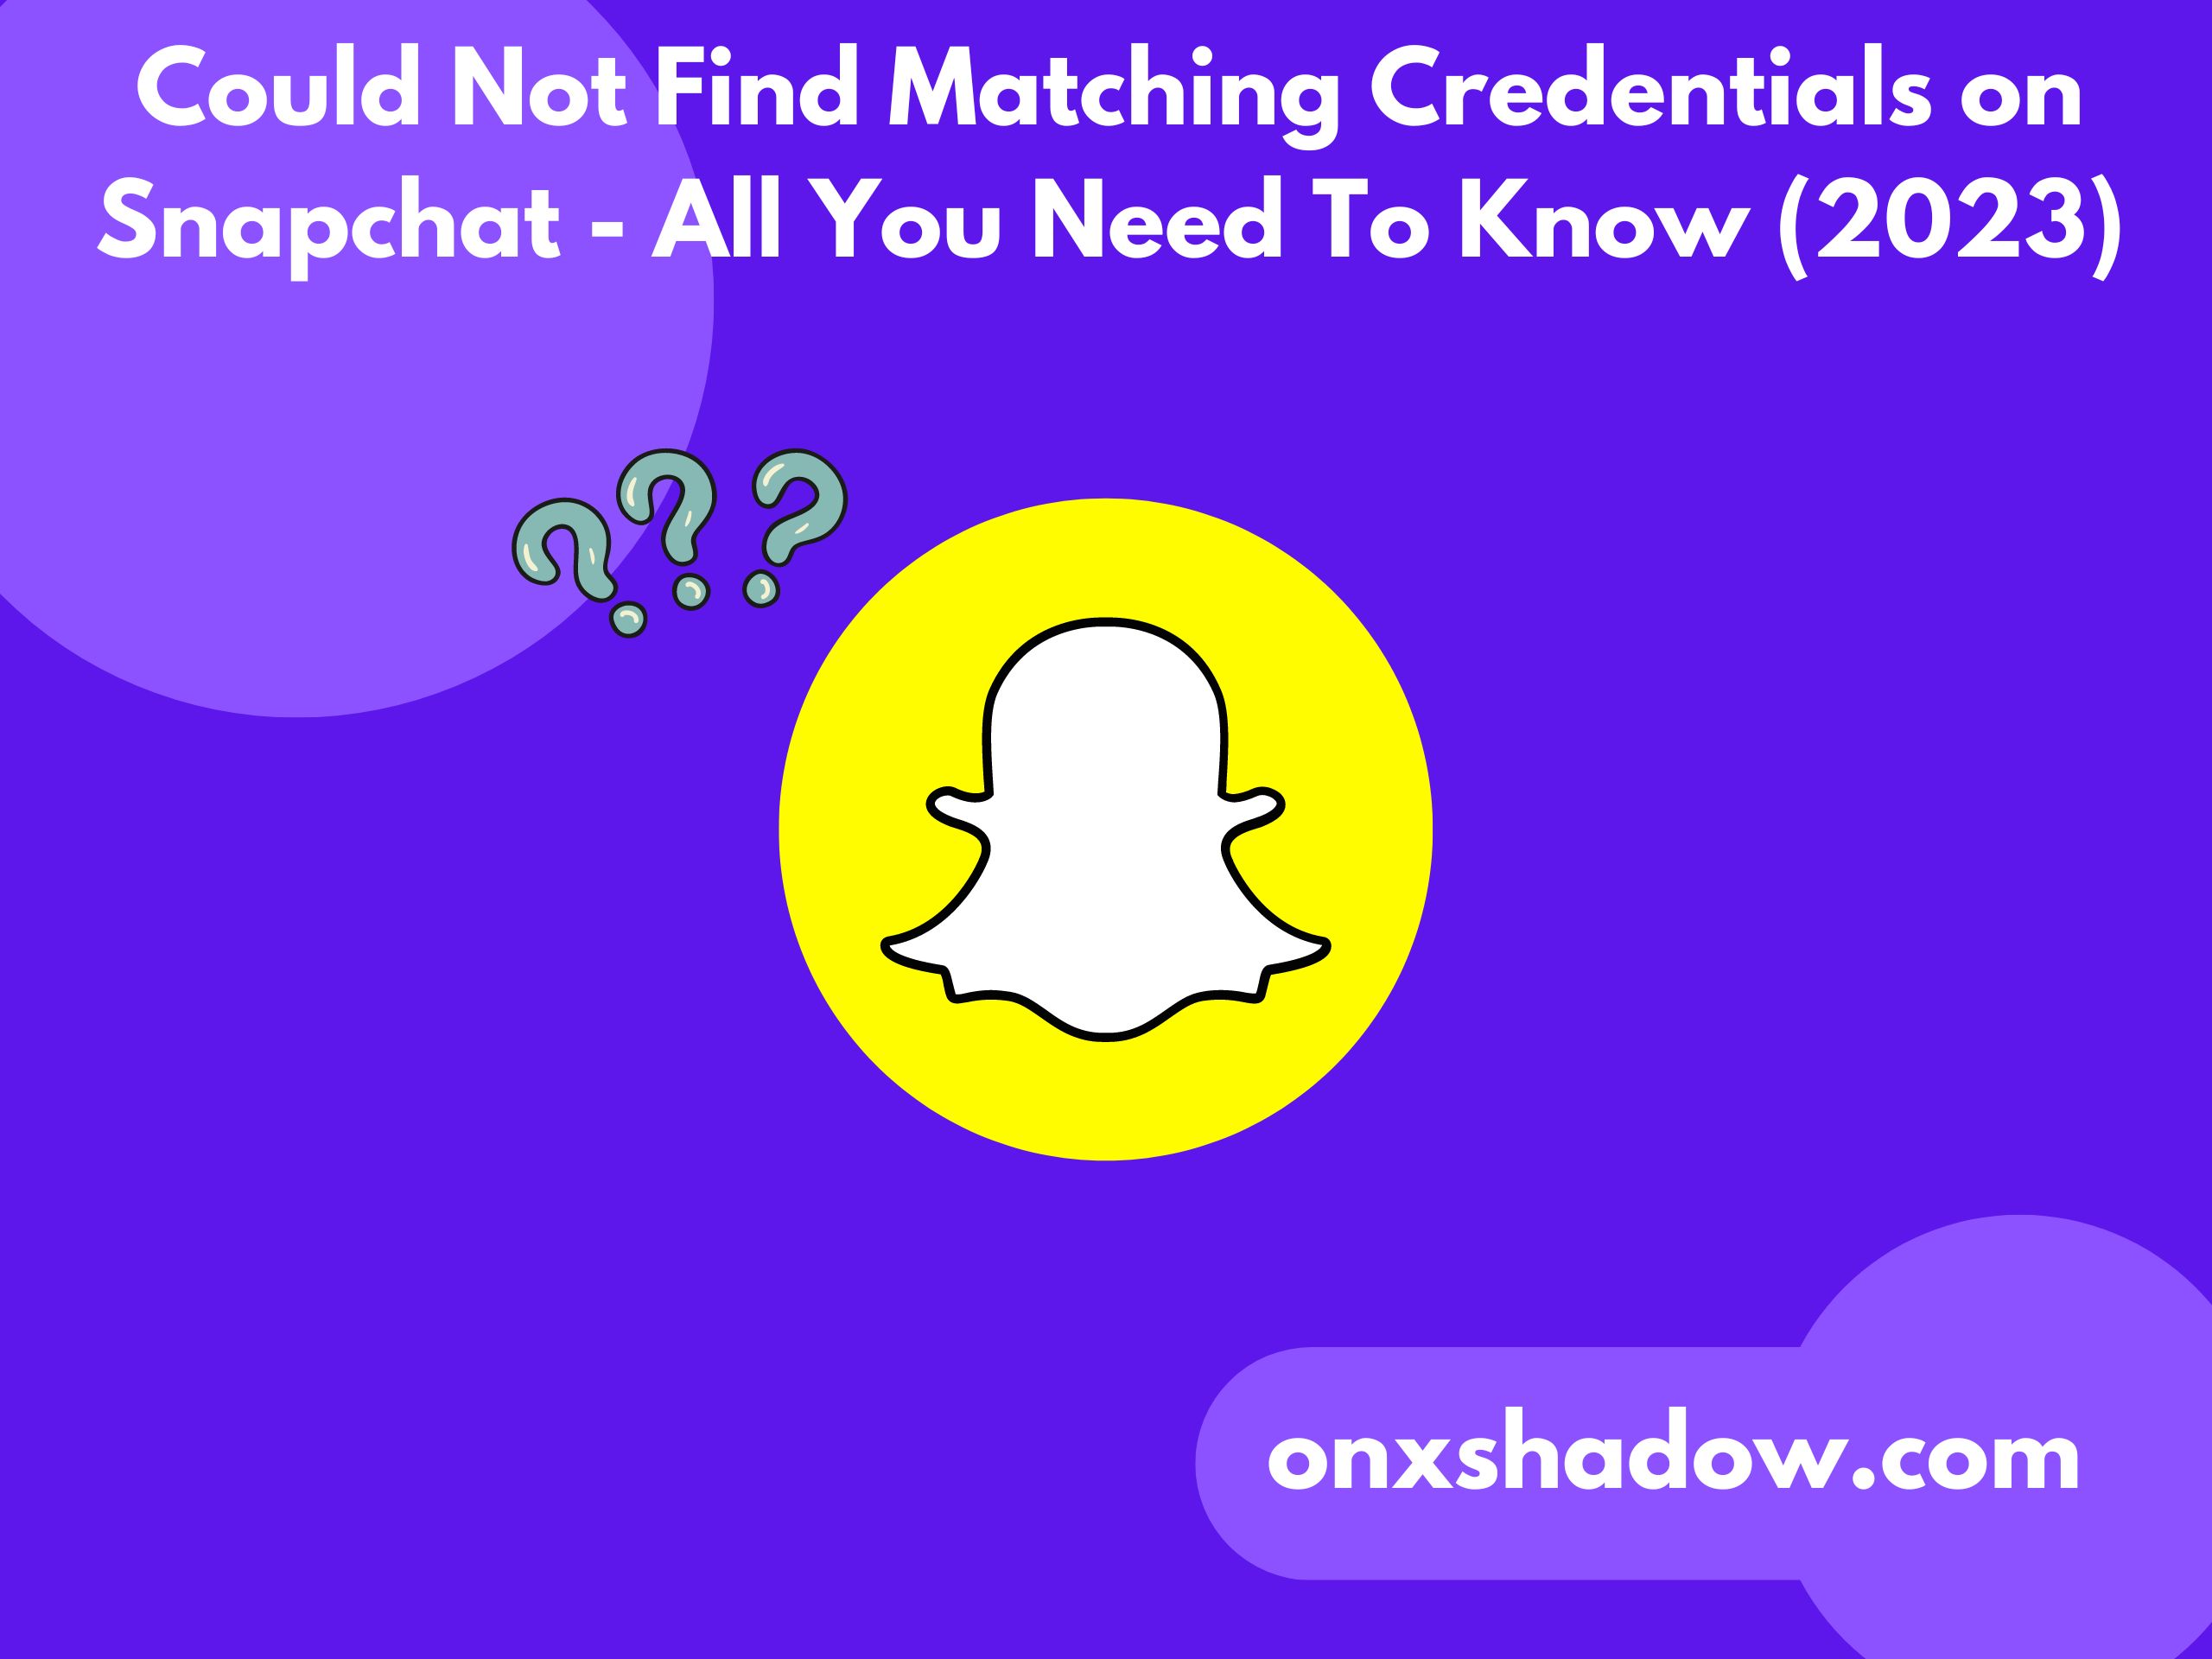 Could Not Find Matching Credentials on Snapchat - All You Need To Know (2023)